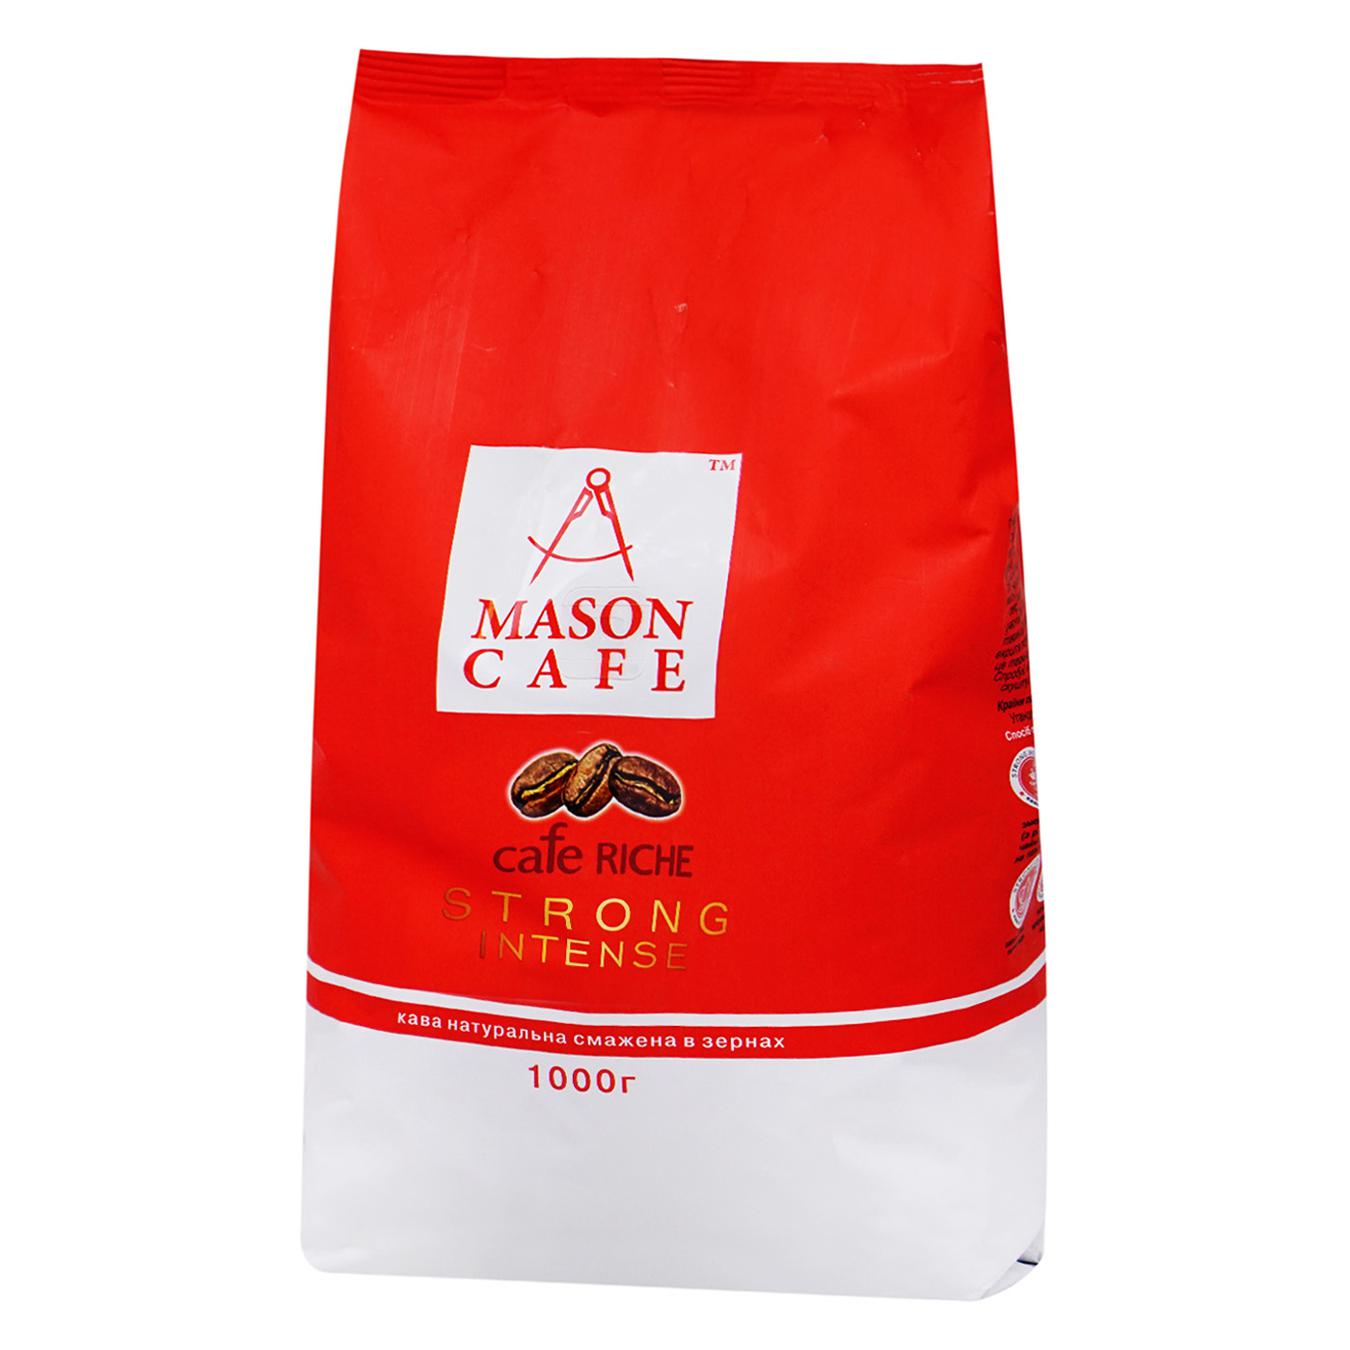 Mason Cafe Strong Intense roasted coffee beans 1 kg